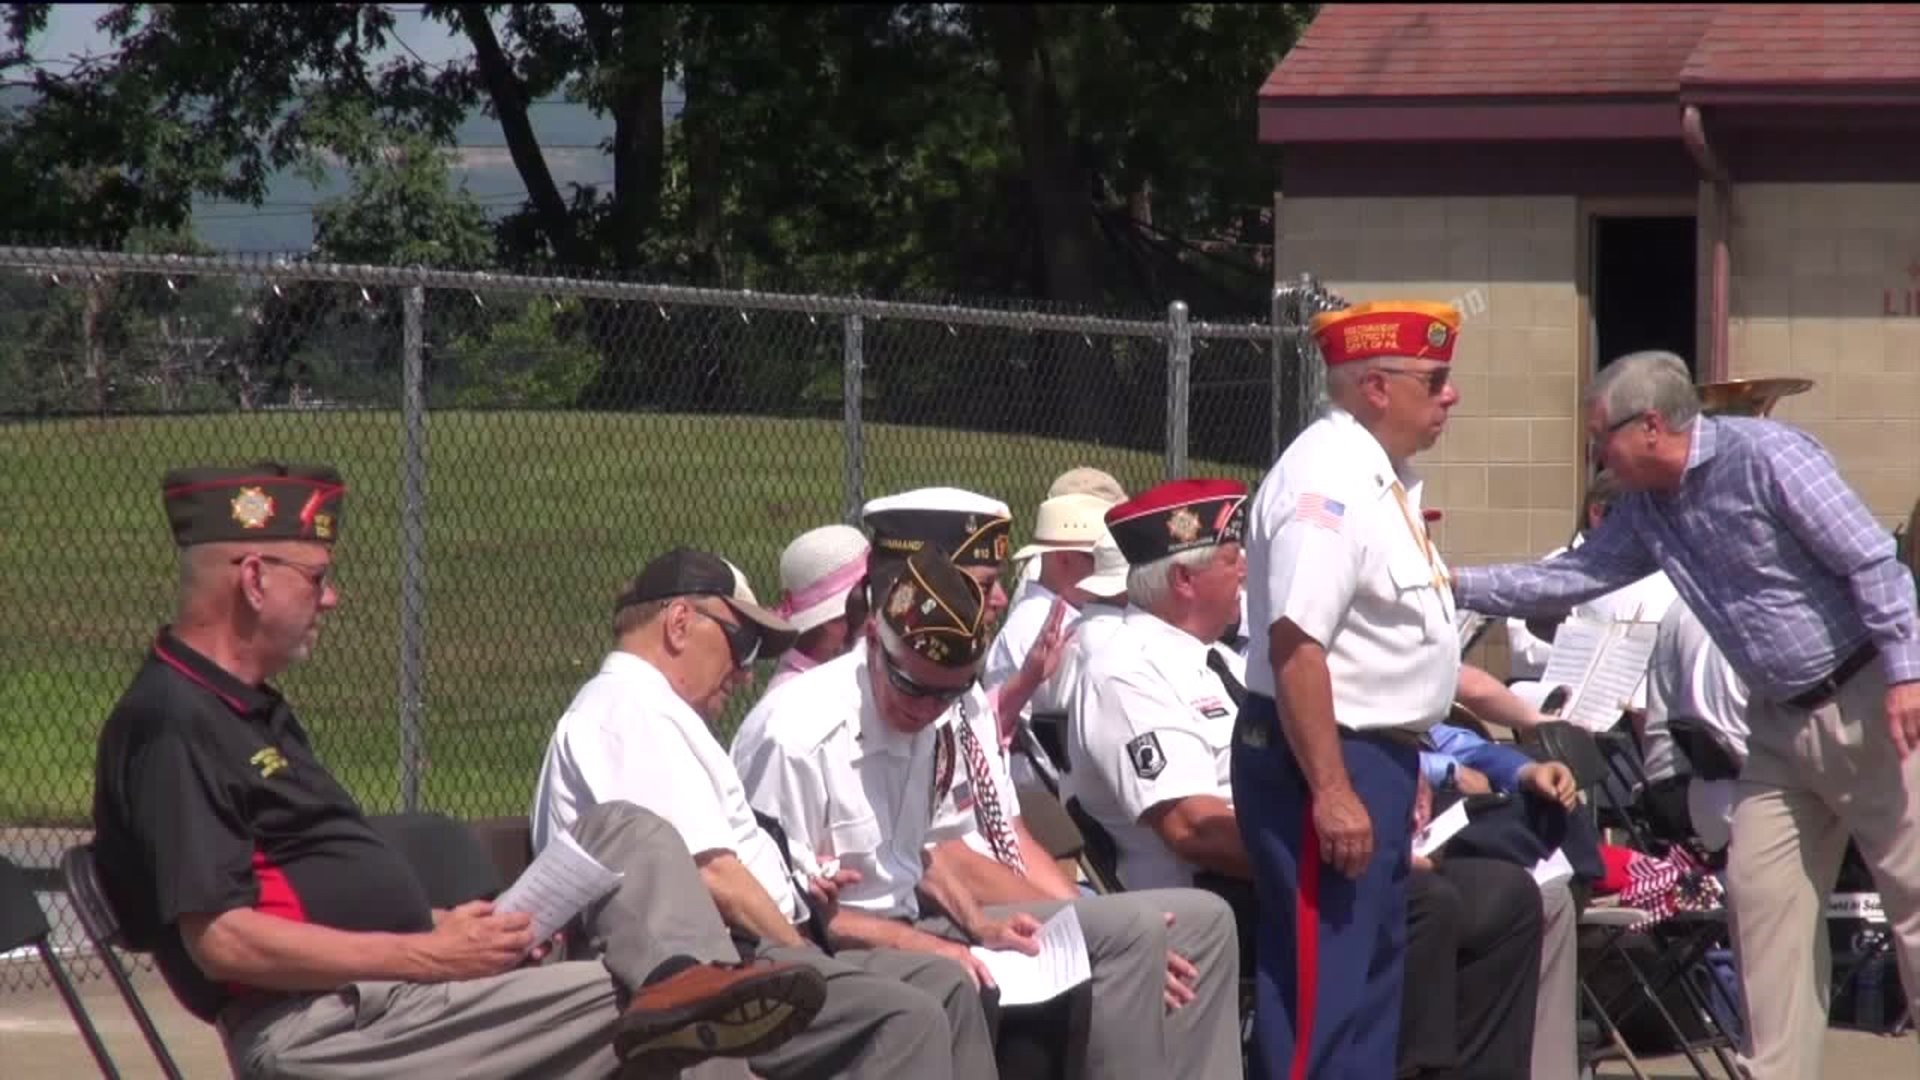 Veterans Honored at Scranton Fourth of July Ceremony